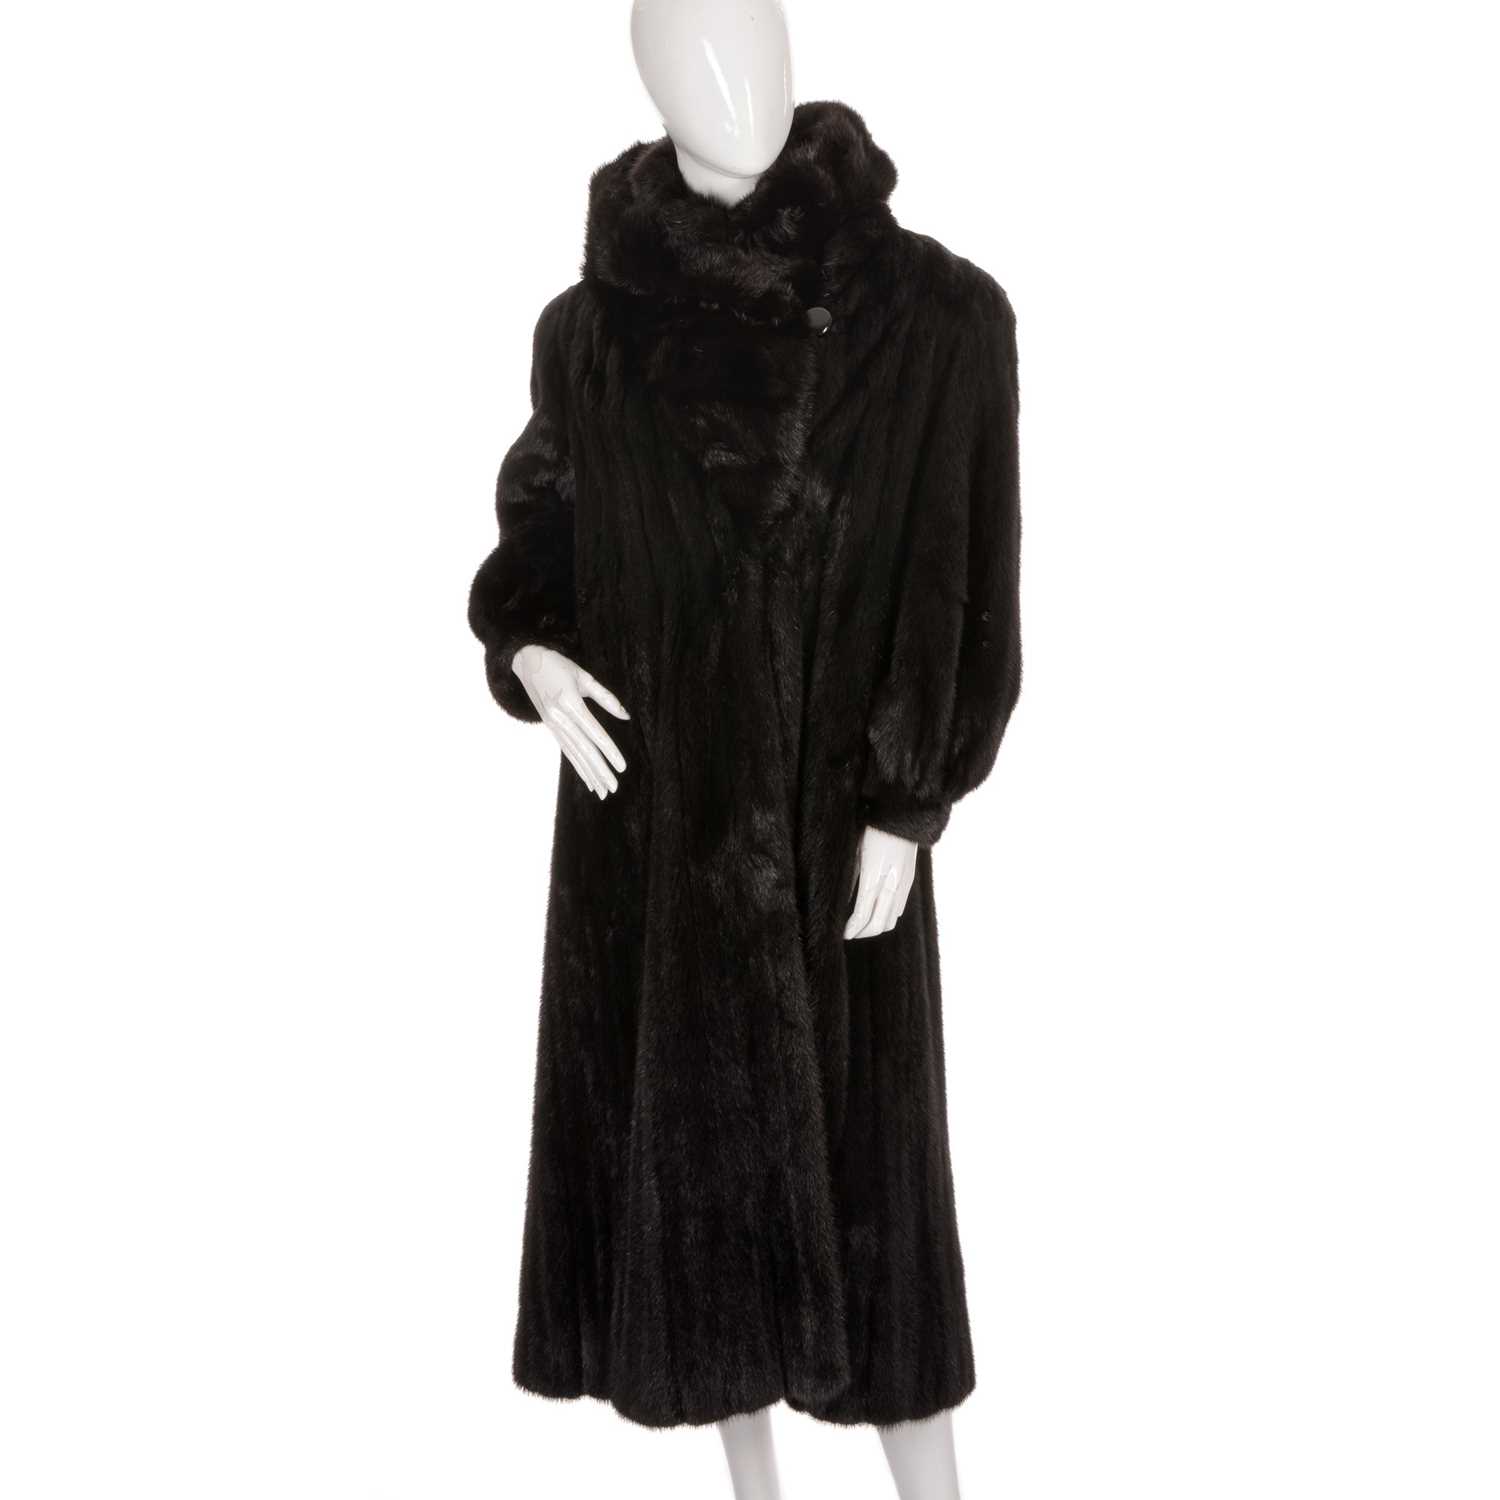 A full-length black mink hooded coat, featuring hook and eye clip fastenings, fitted cuffs, a - Image 2 of 4